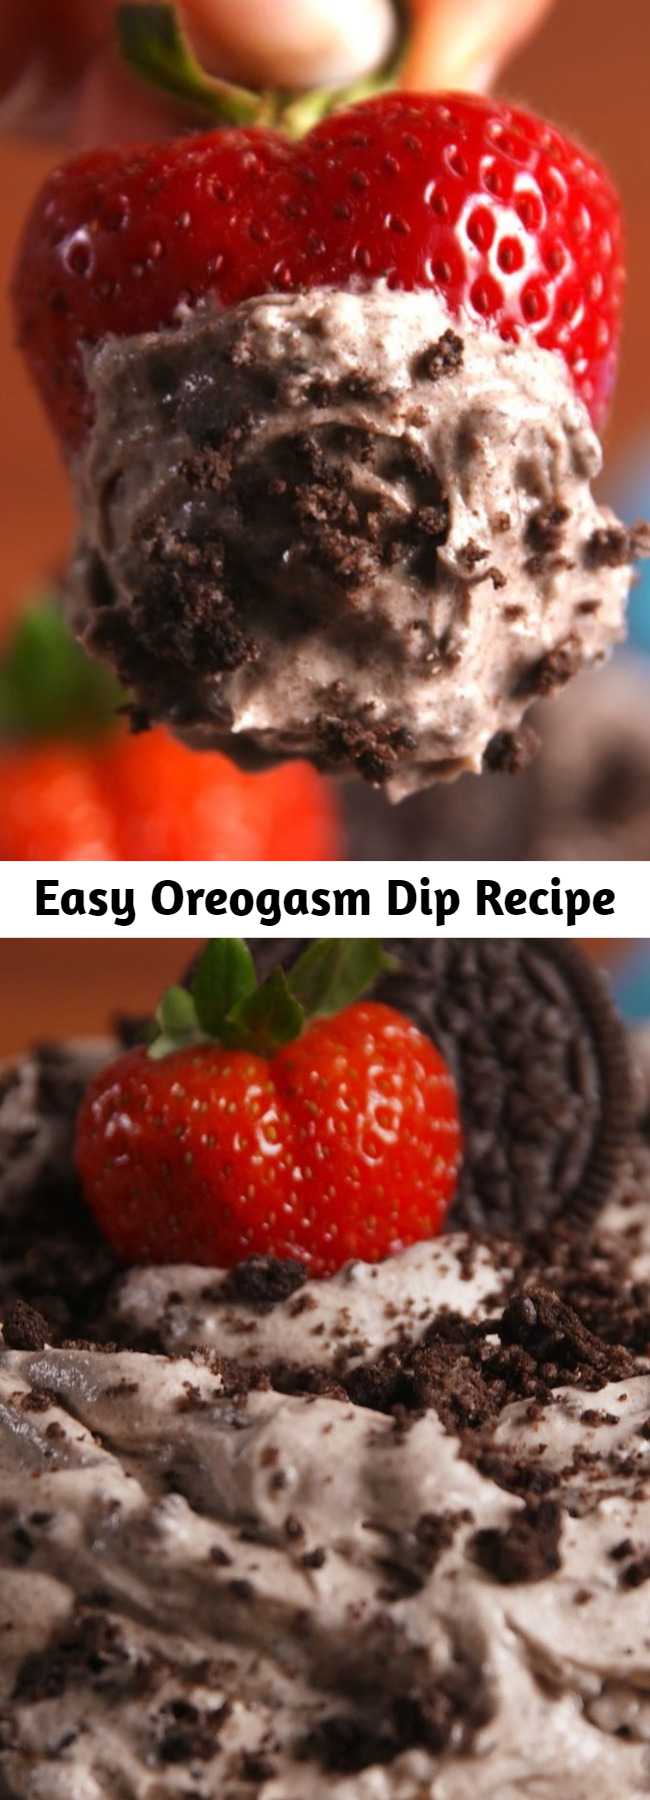 Easy Oreogasm Dip Recipe - This Oreogasm Dip lives up to its name. Cookies and cream lovers, this it the dip for you.